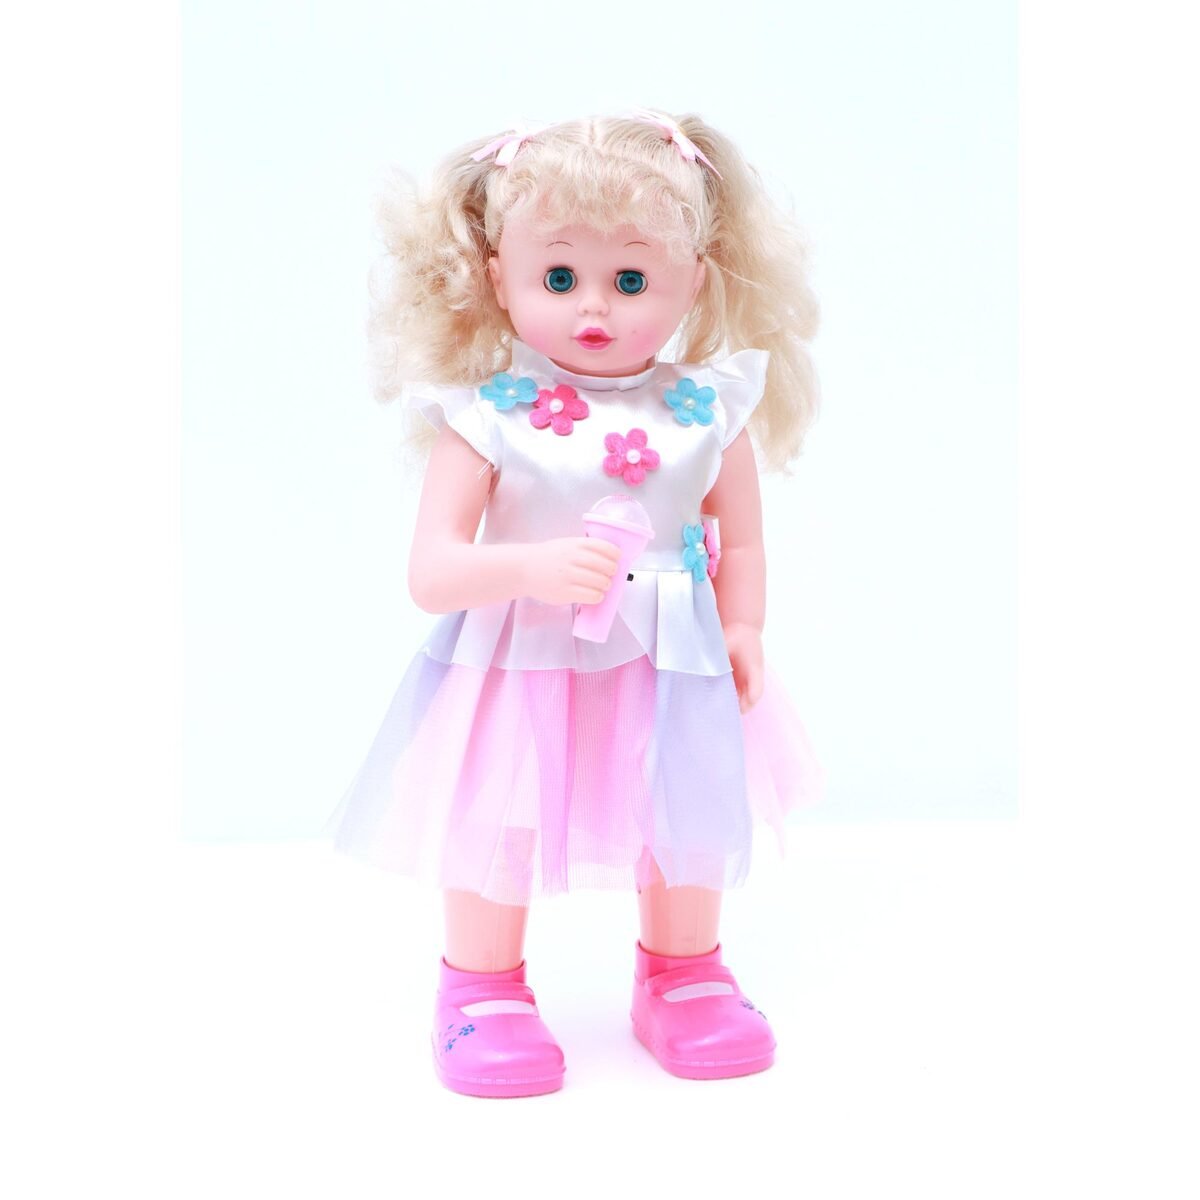 Selection Battery Operated Happy Doll FD-3531